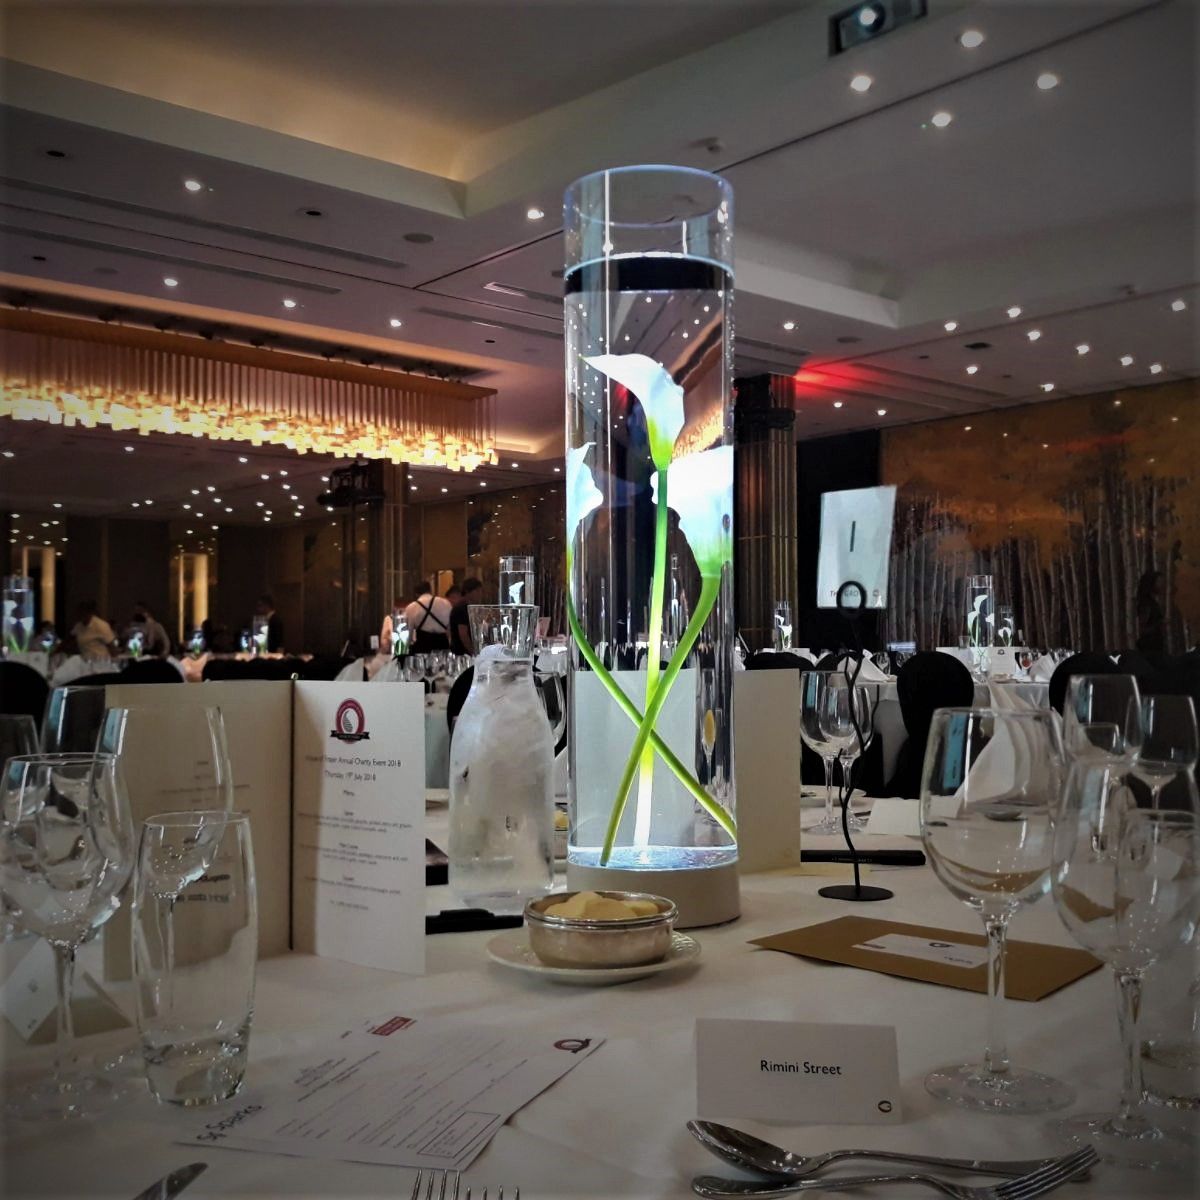 3 calla lily's submerged in water with LED White lighting illuminating the centrepiece perfectly